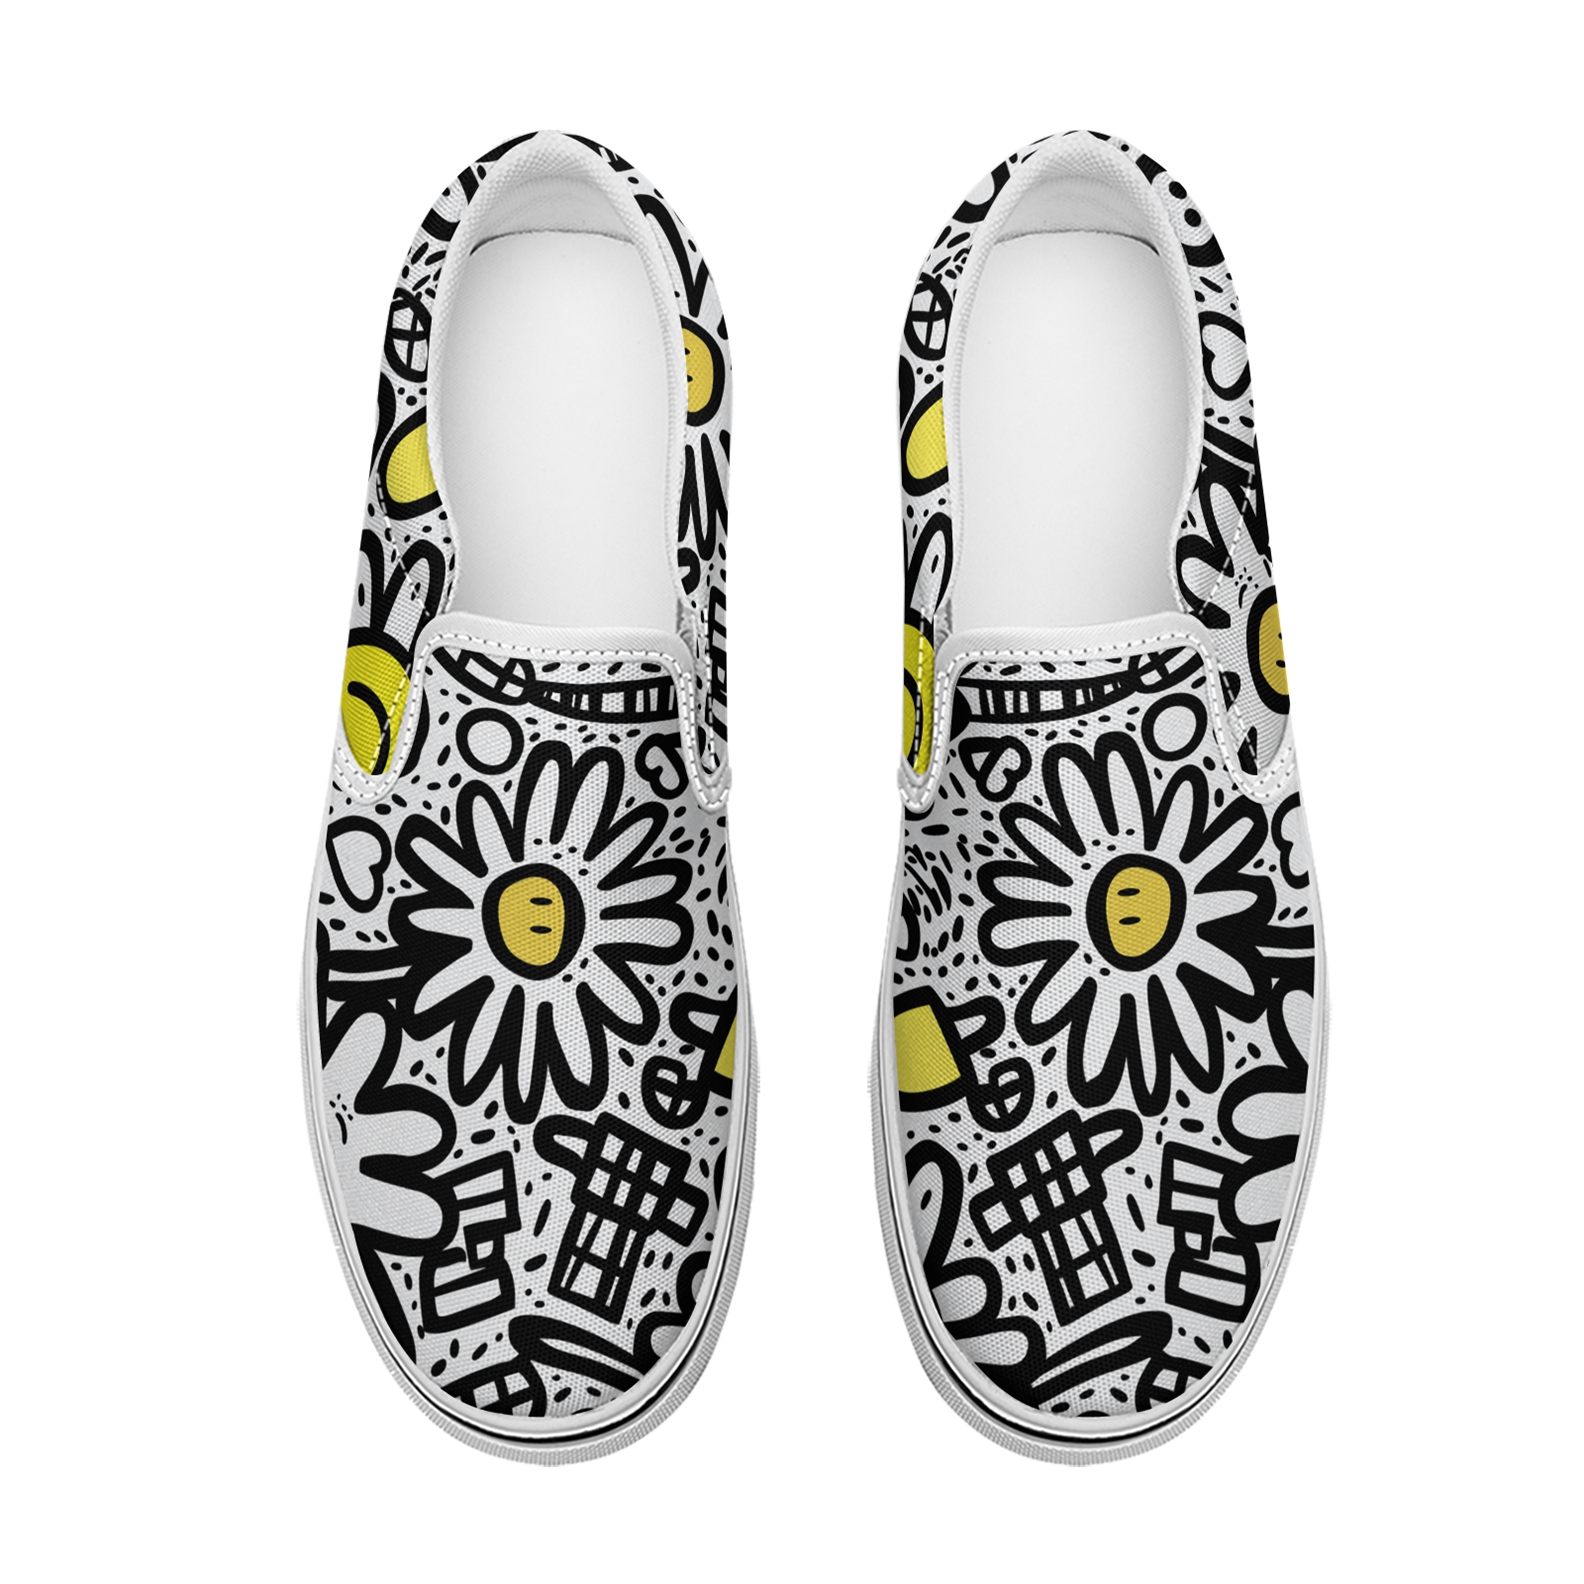 Women's fashion black and white daisy-printed canvas shoes Slippers Low top casual walking shoes Classic comfortable flat fashion sneakers